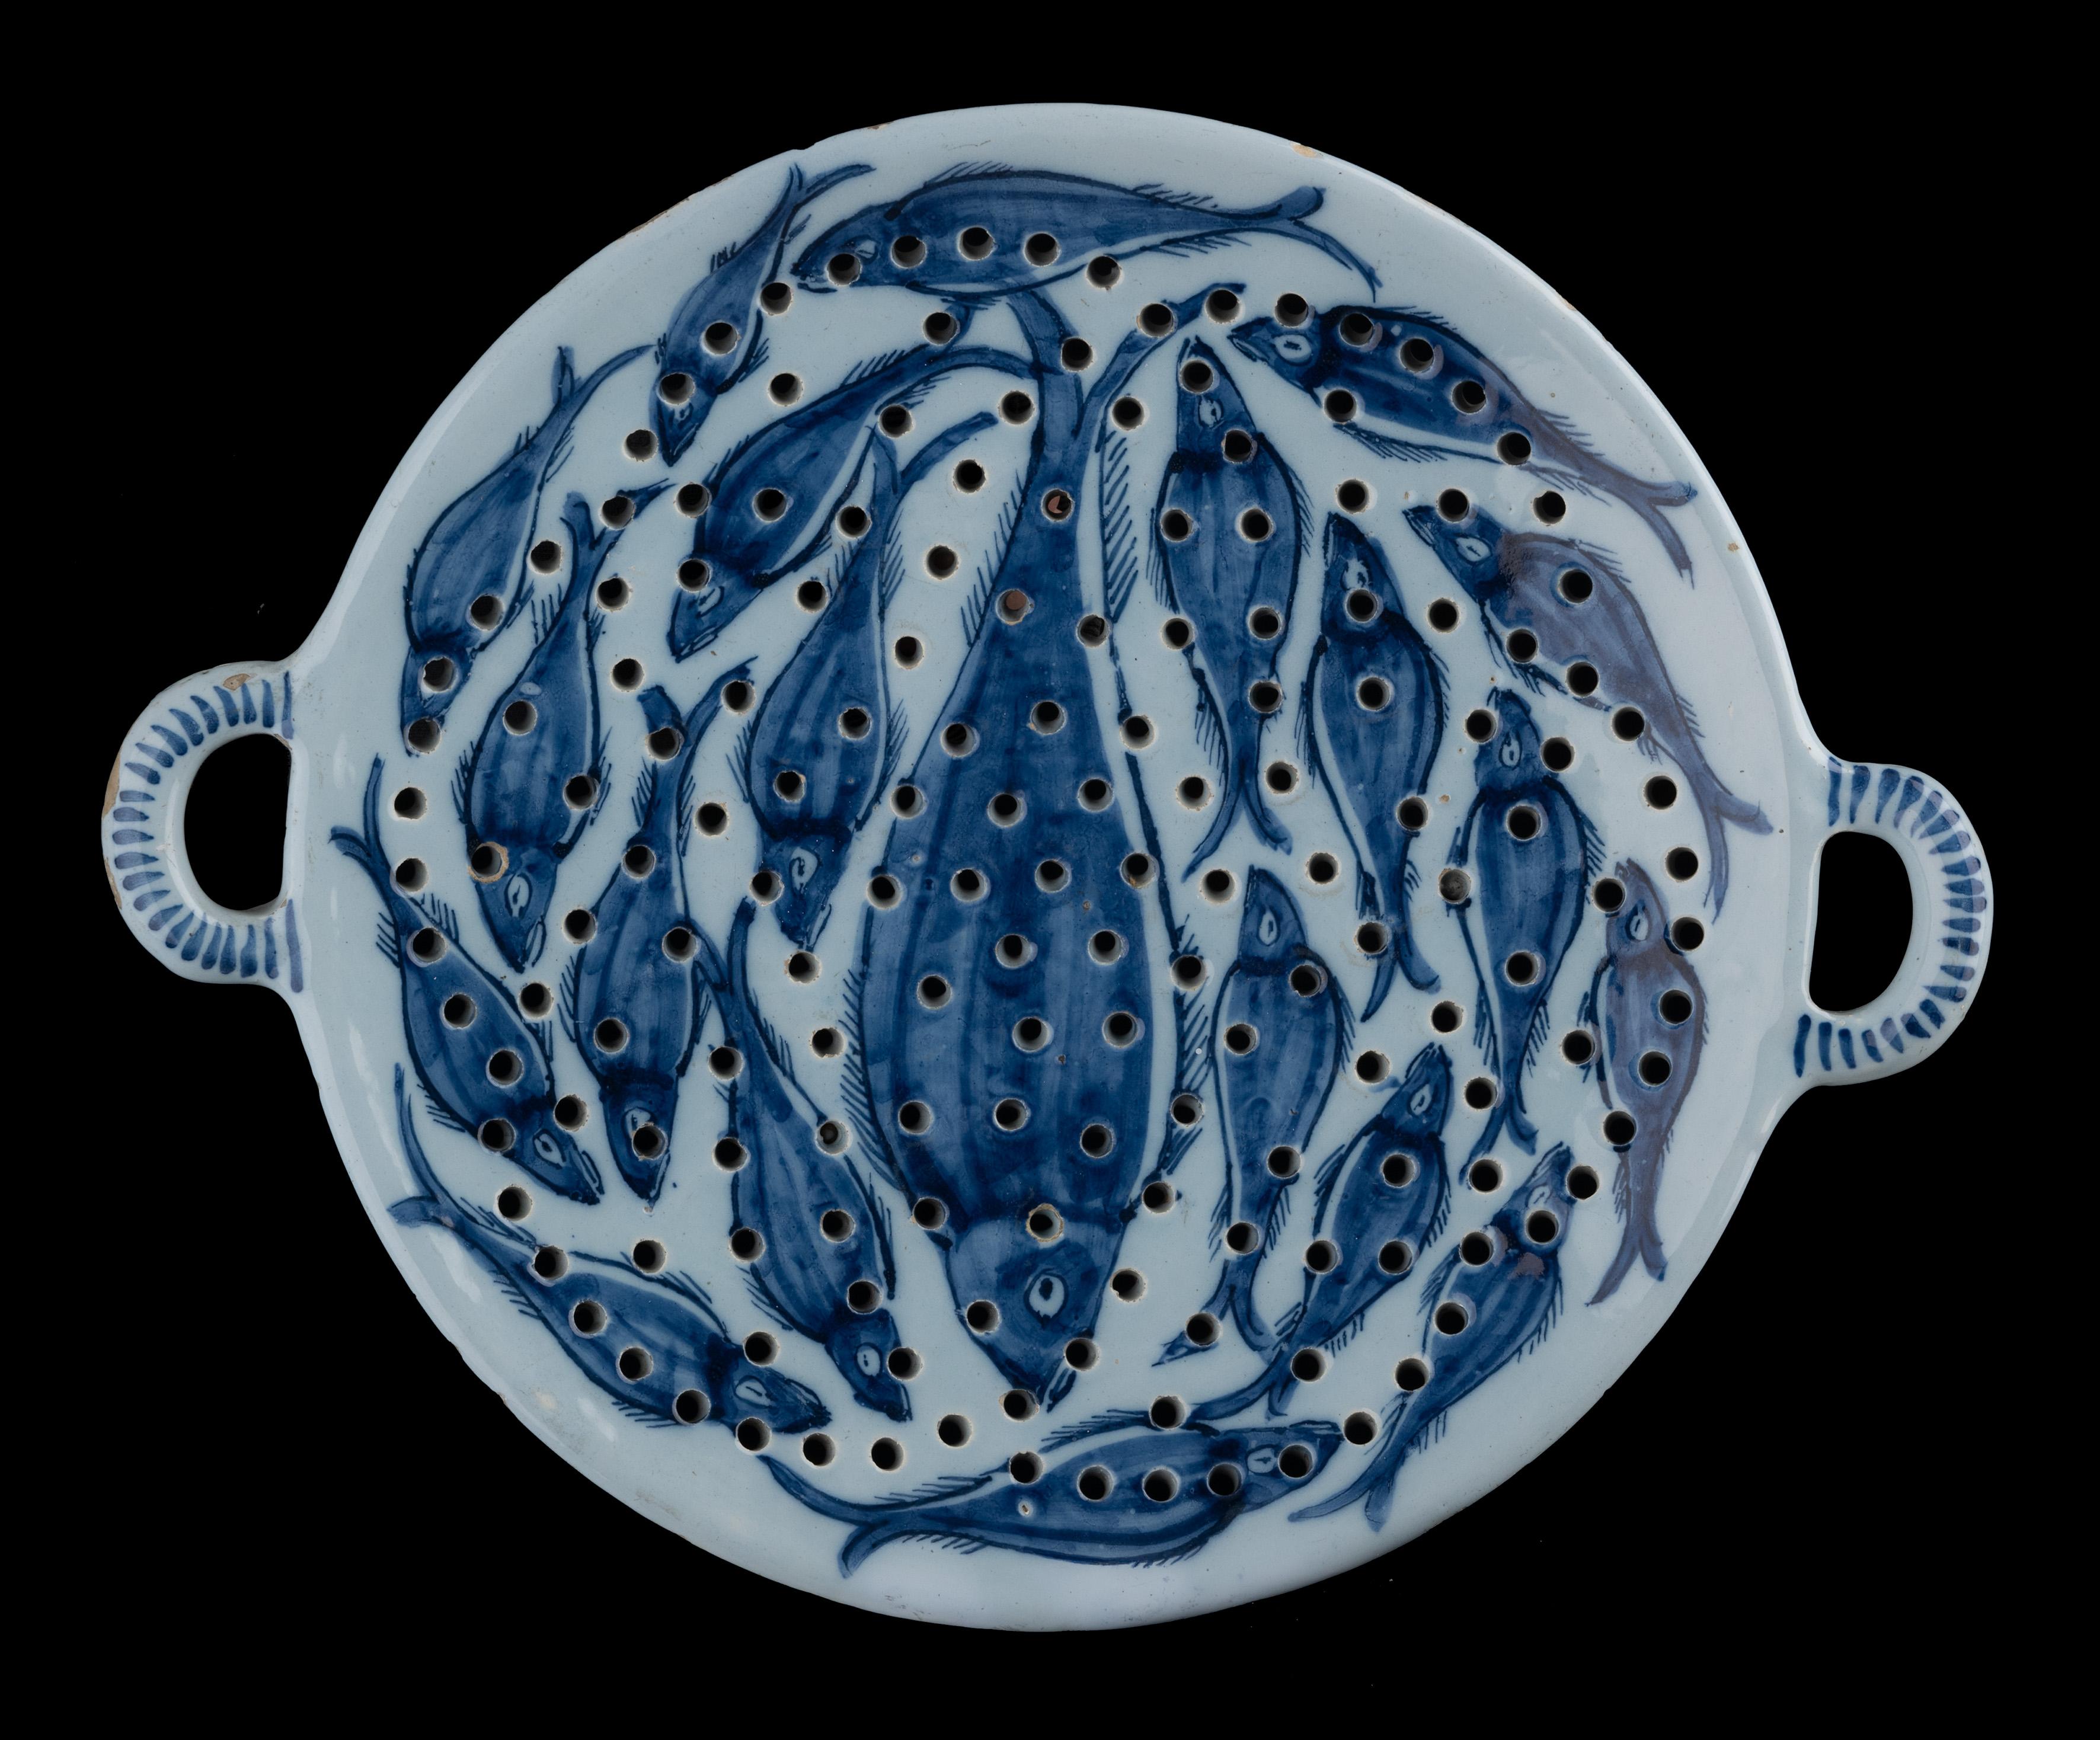 Blue and white fish colander Delft, 1725-1750

The blue and white colander stands on three legs and has two round handles. Painted on the front are one large and twenty small fish, presumably bream. The back features an exuberant floral design,